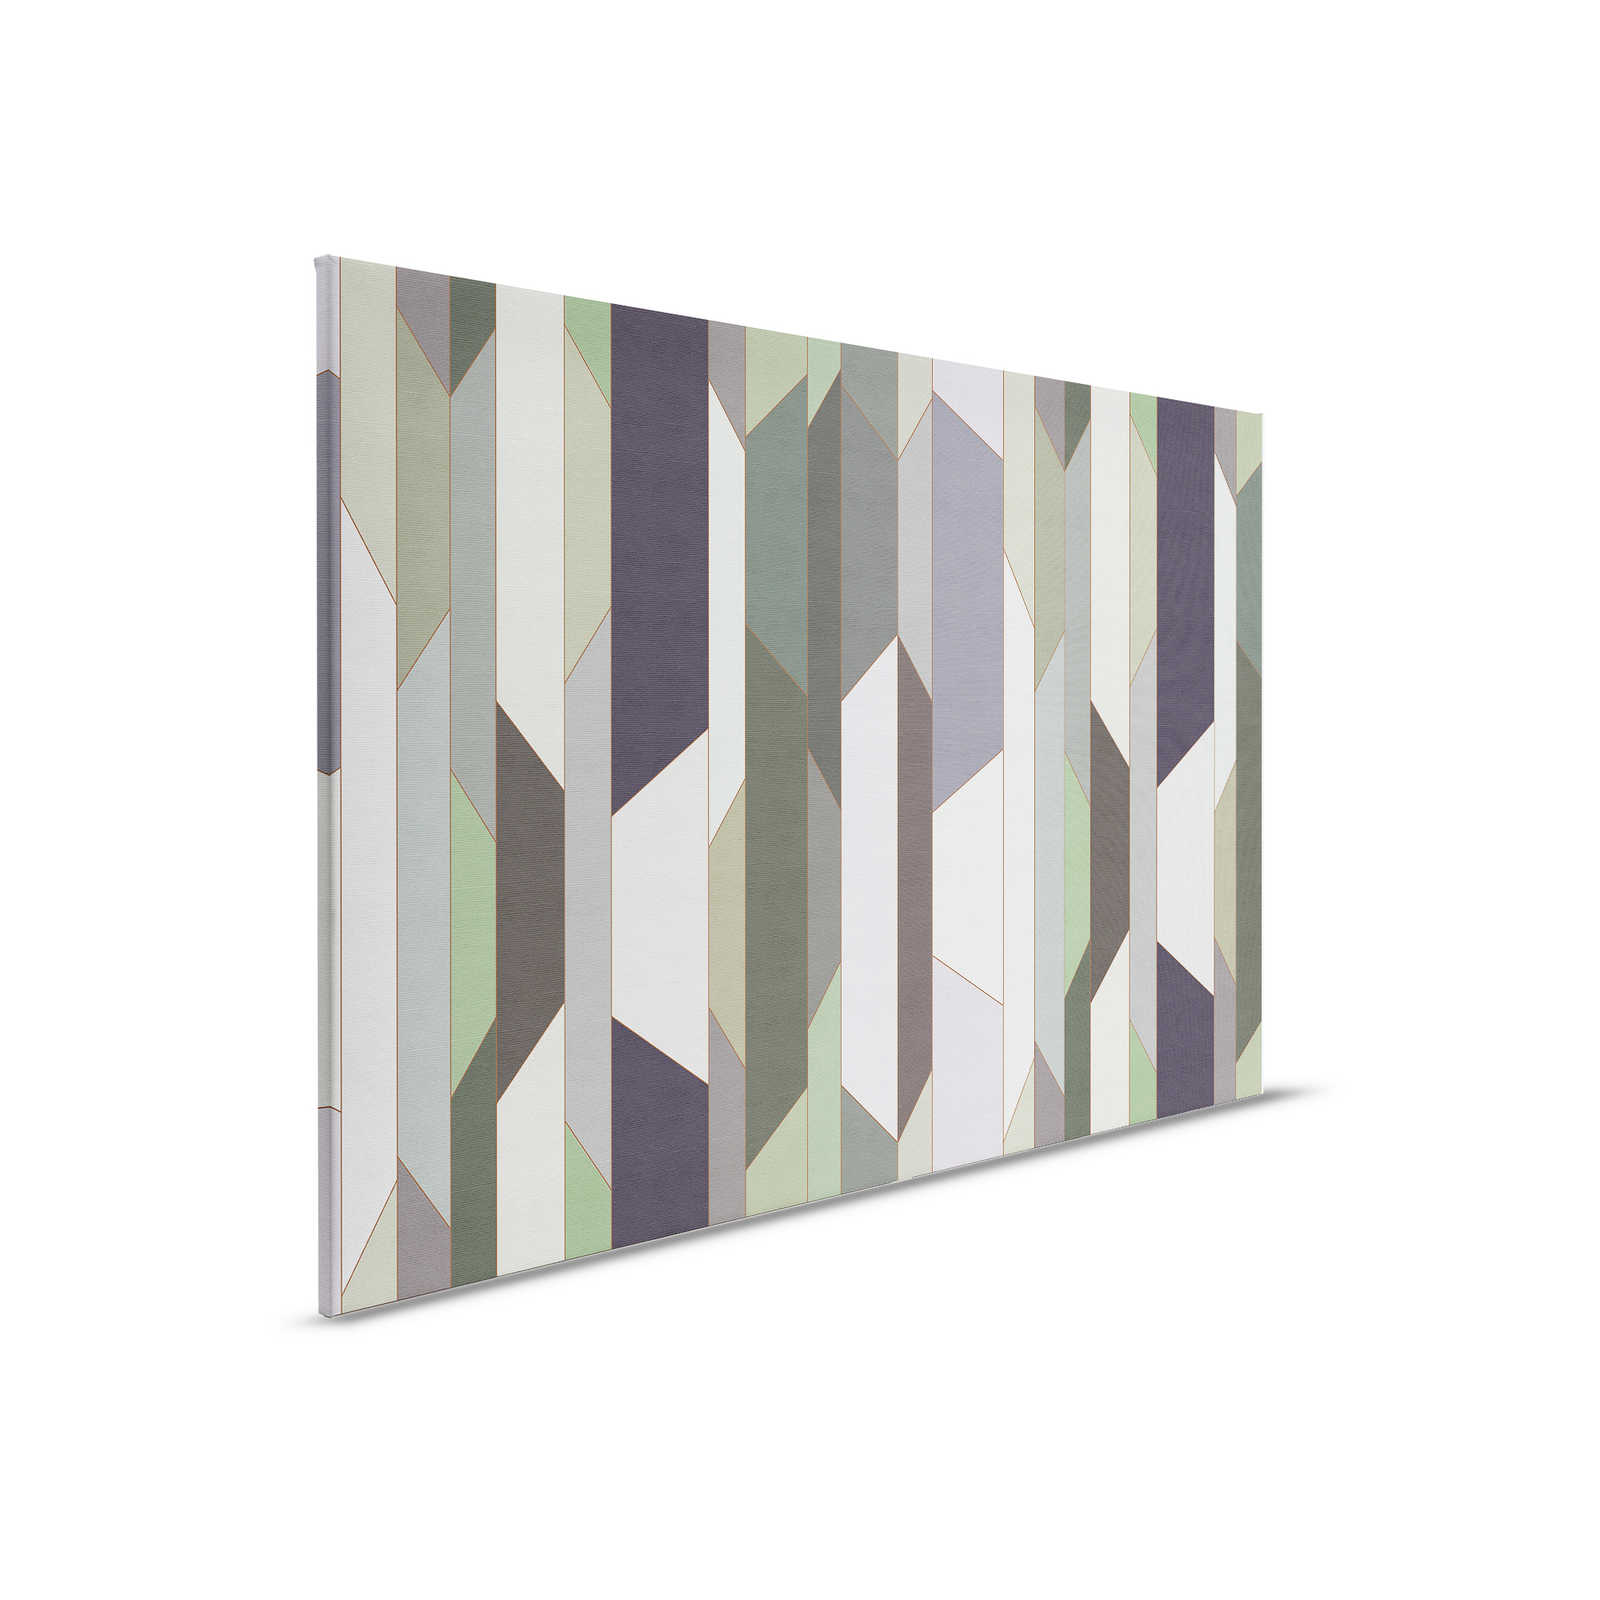         Fold 1 - Canvas painting with retro style stripe design - 0.90 m x 0.60 m
    